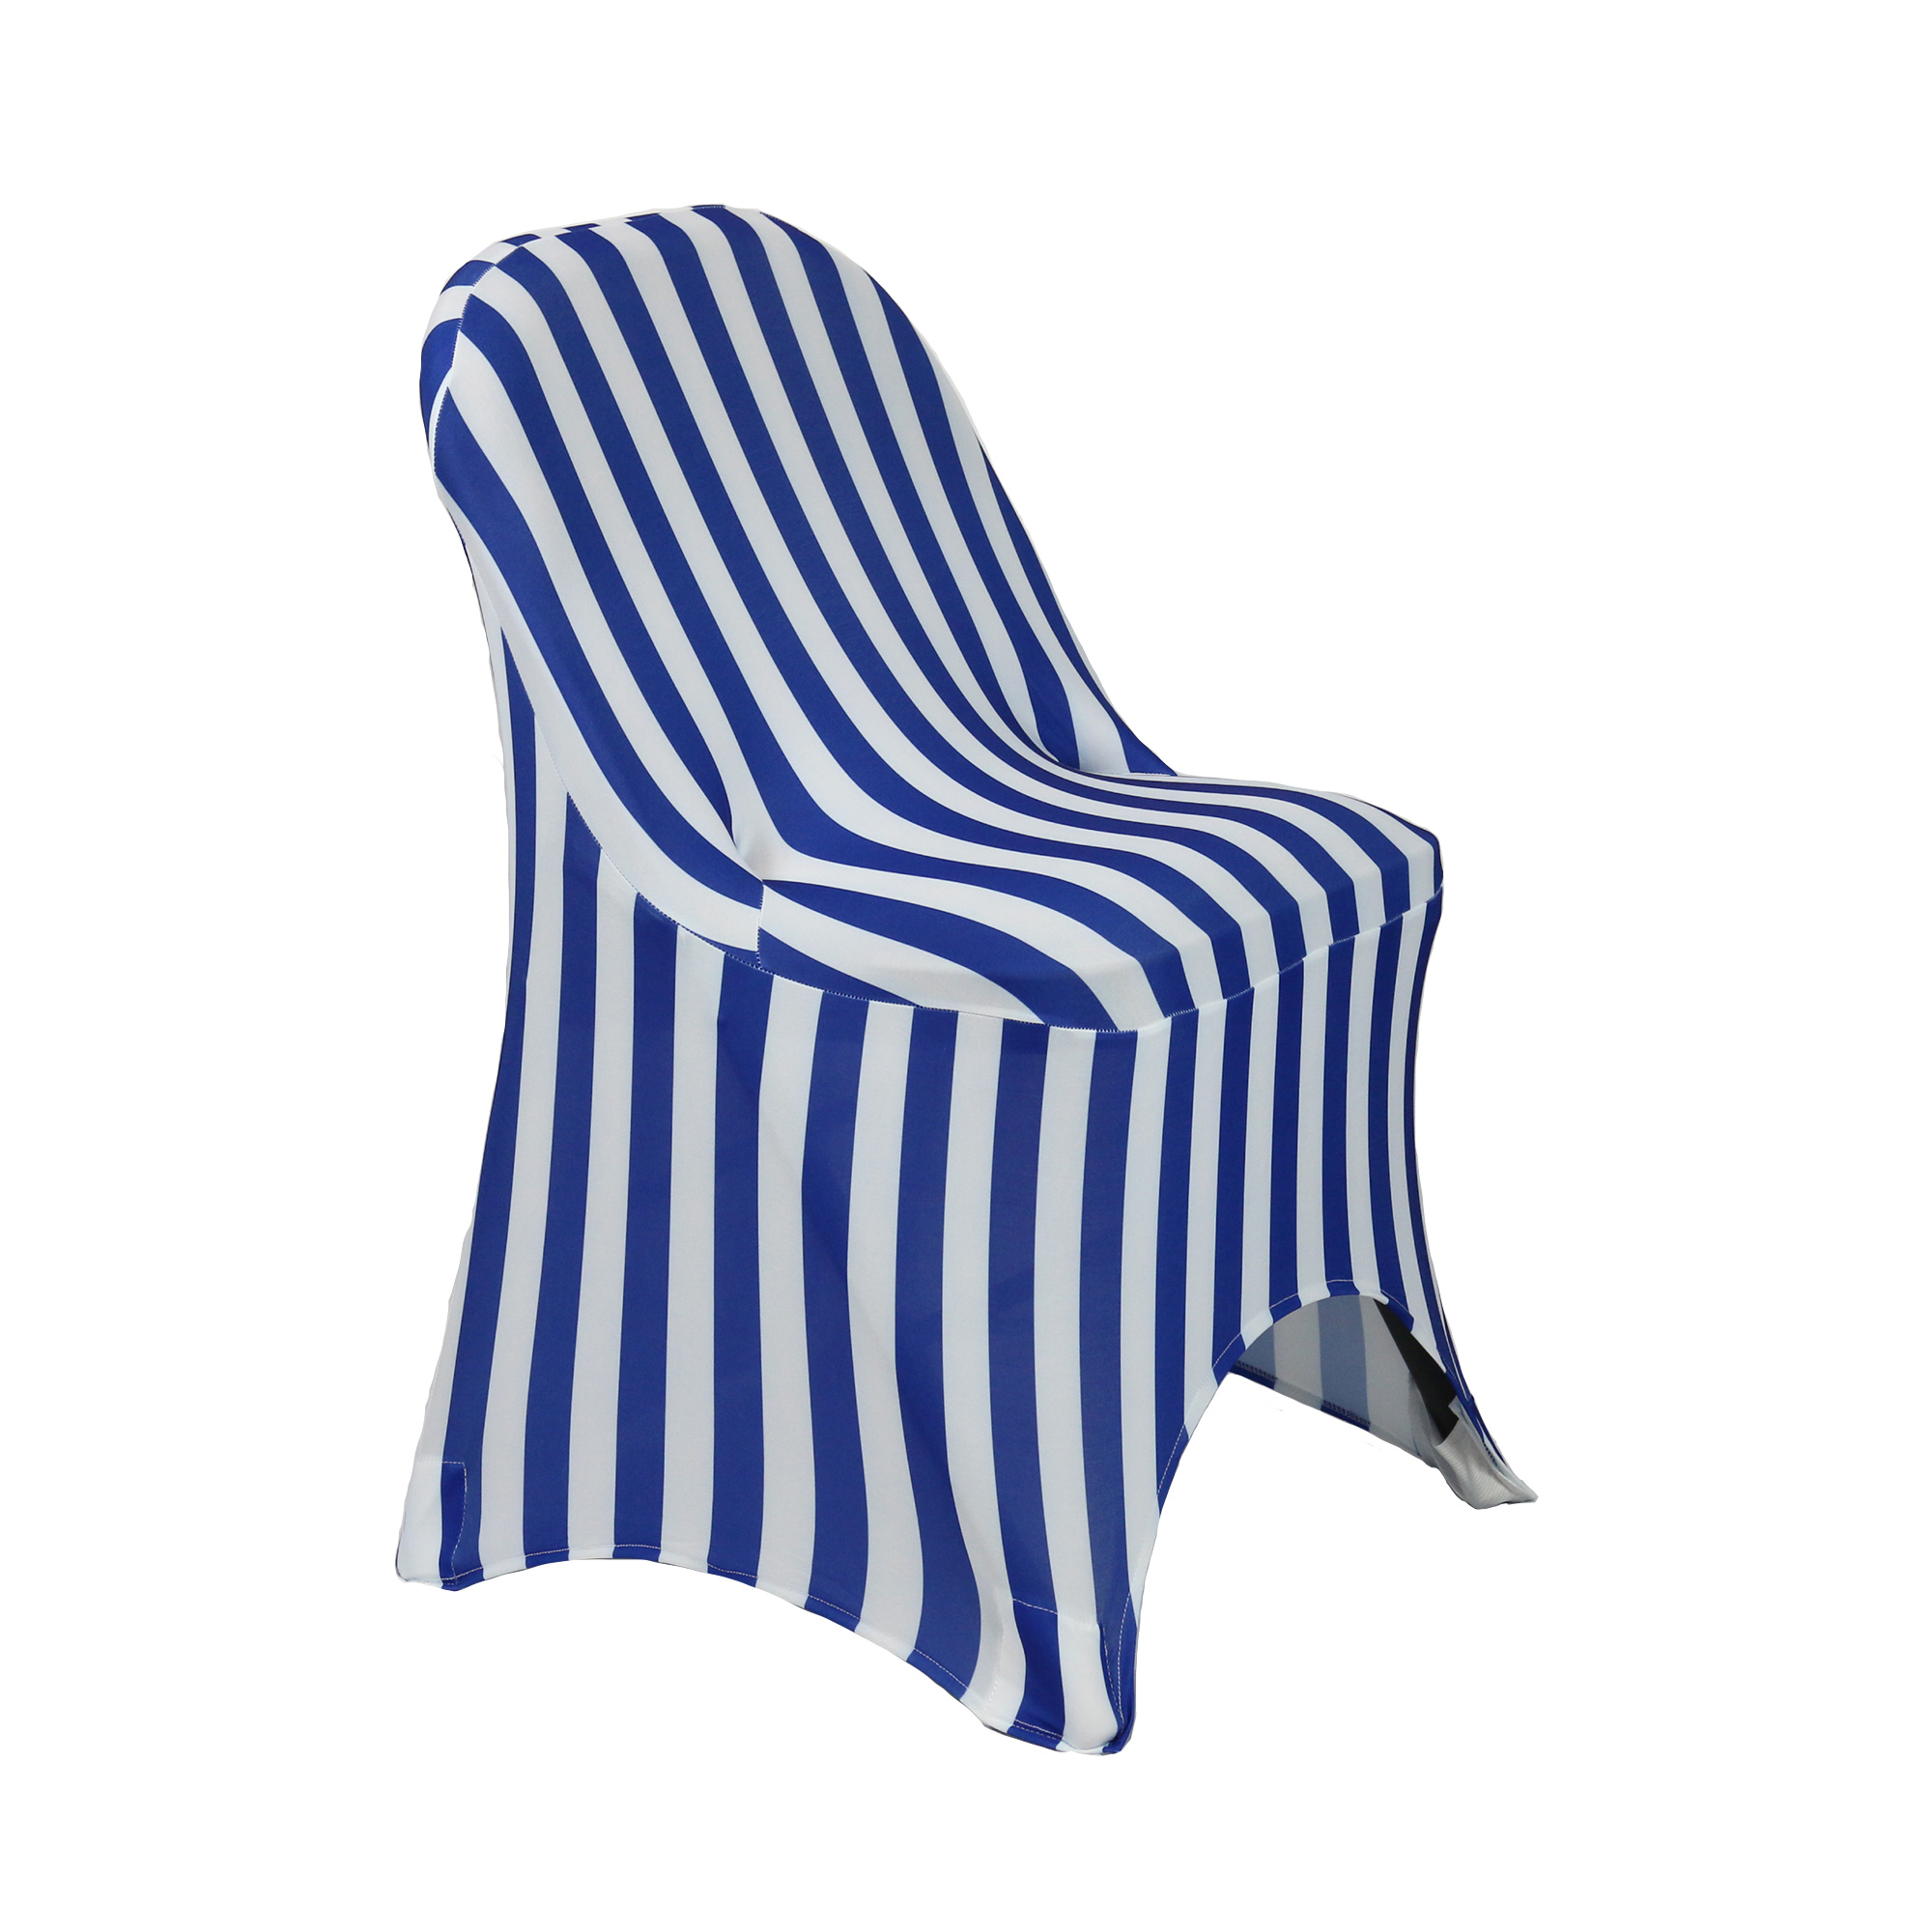 Your Chair Covers - Stretch Spandex Folding Chair Covers Striped Royal Blue/White for Wedding, Party, Birthday, Patio, etc. - image 2 of 3